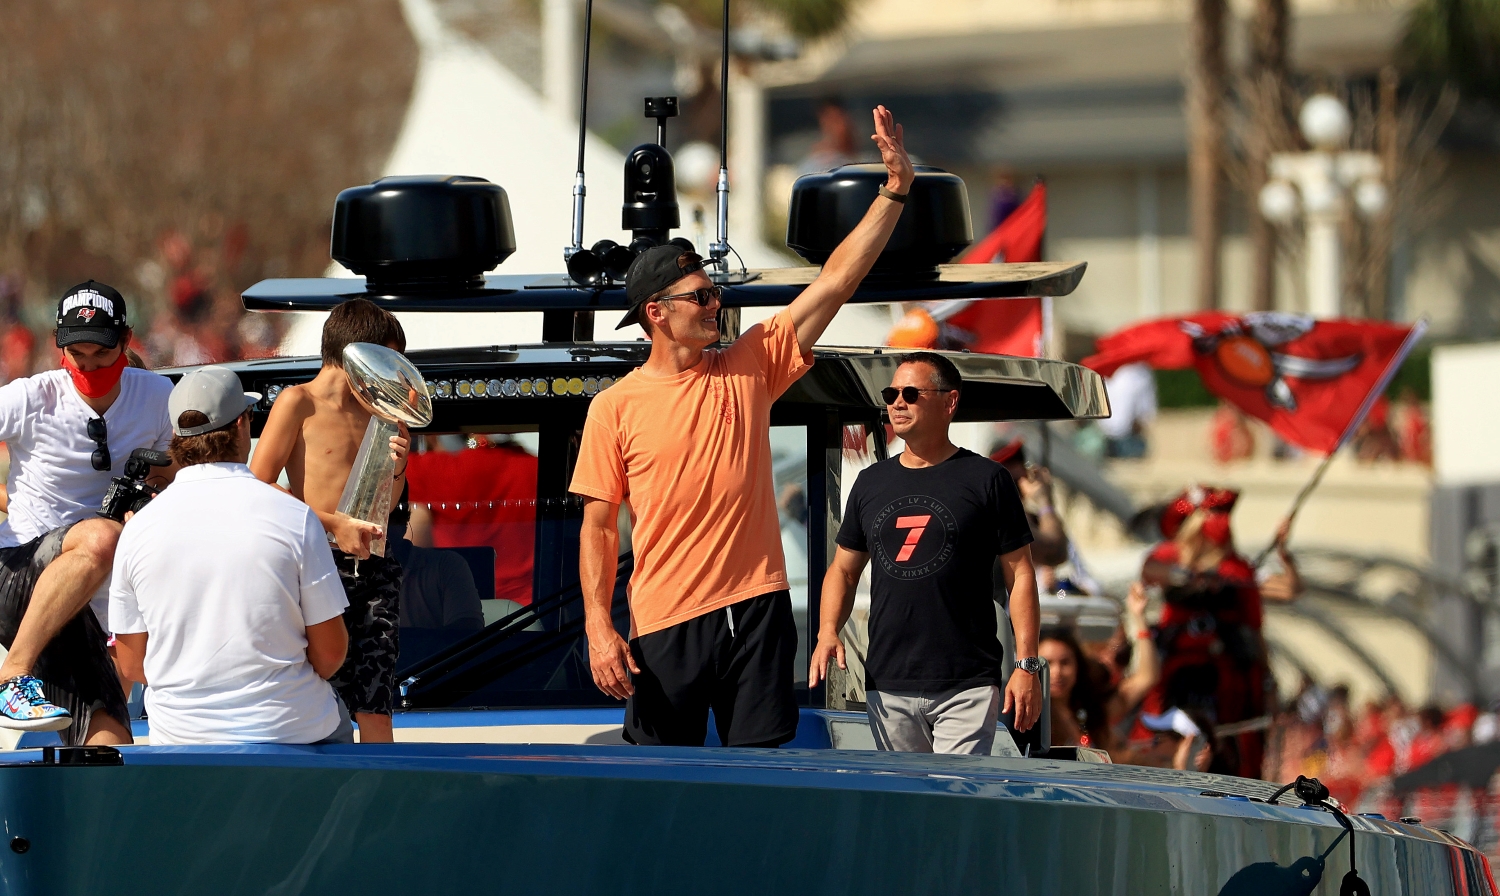 Tom Brady of the Tampa Bay Buccaneers celebrates their Super Bowl 55 victory during a boat parade through the city.